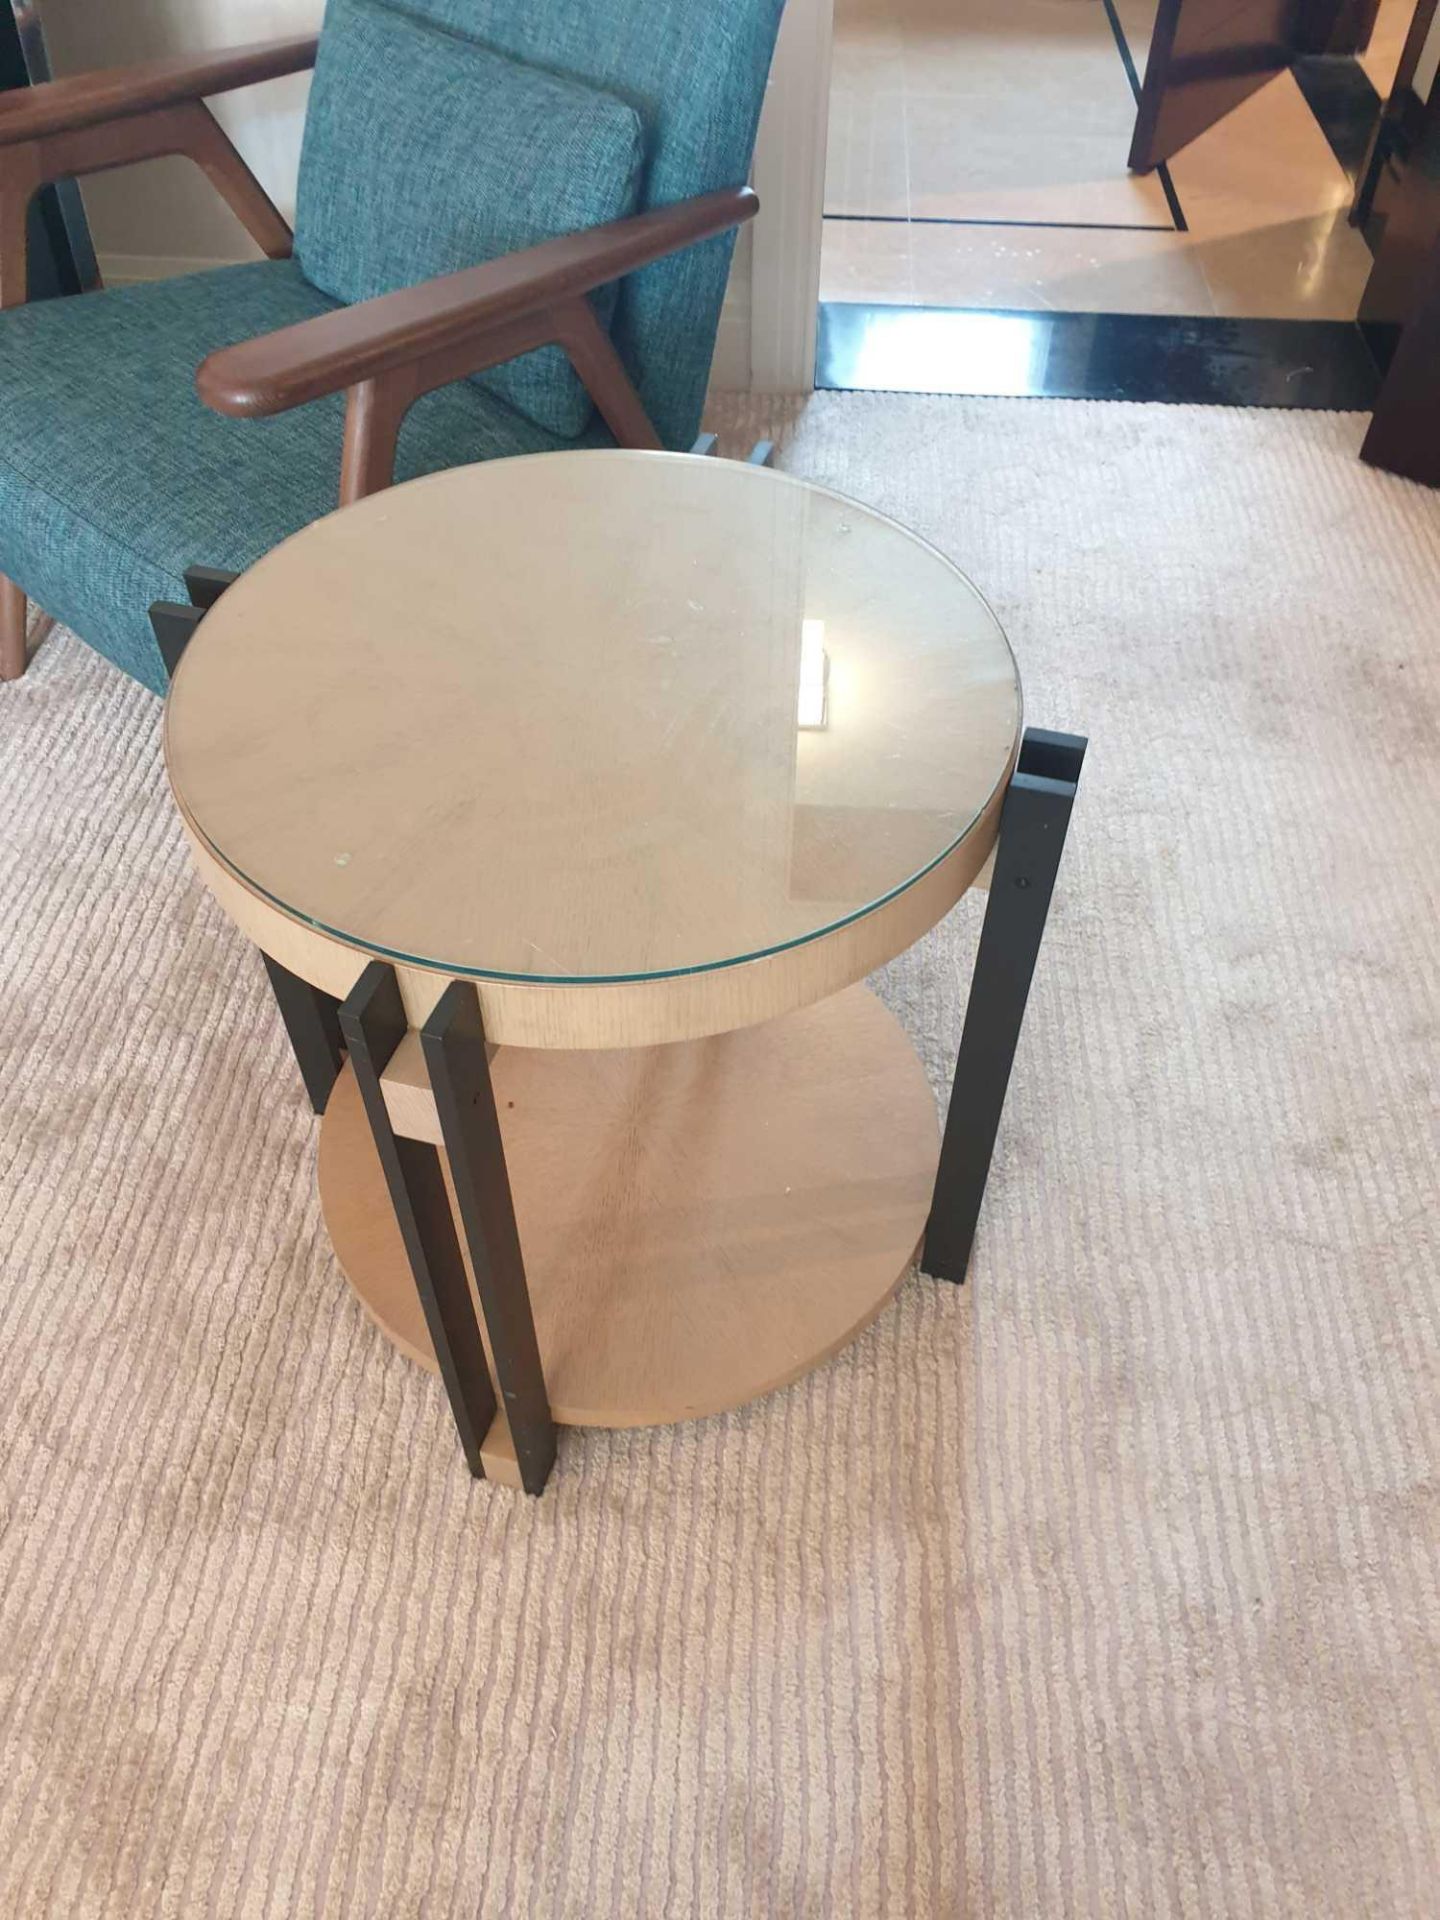 A Contemporary Side Table With Glass Top 61 x 57cm - Image 4 of 6